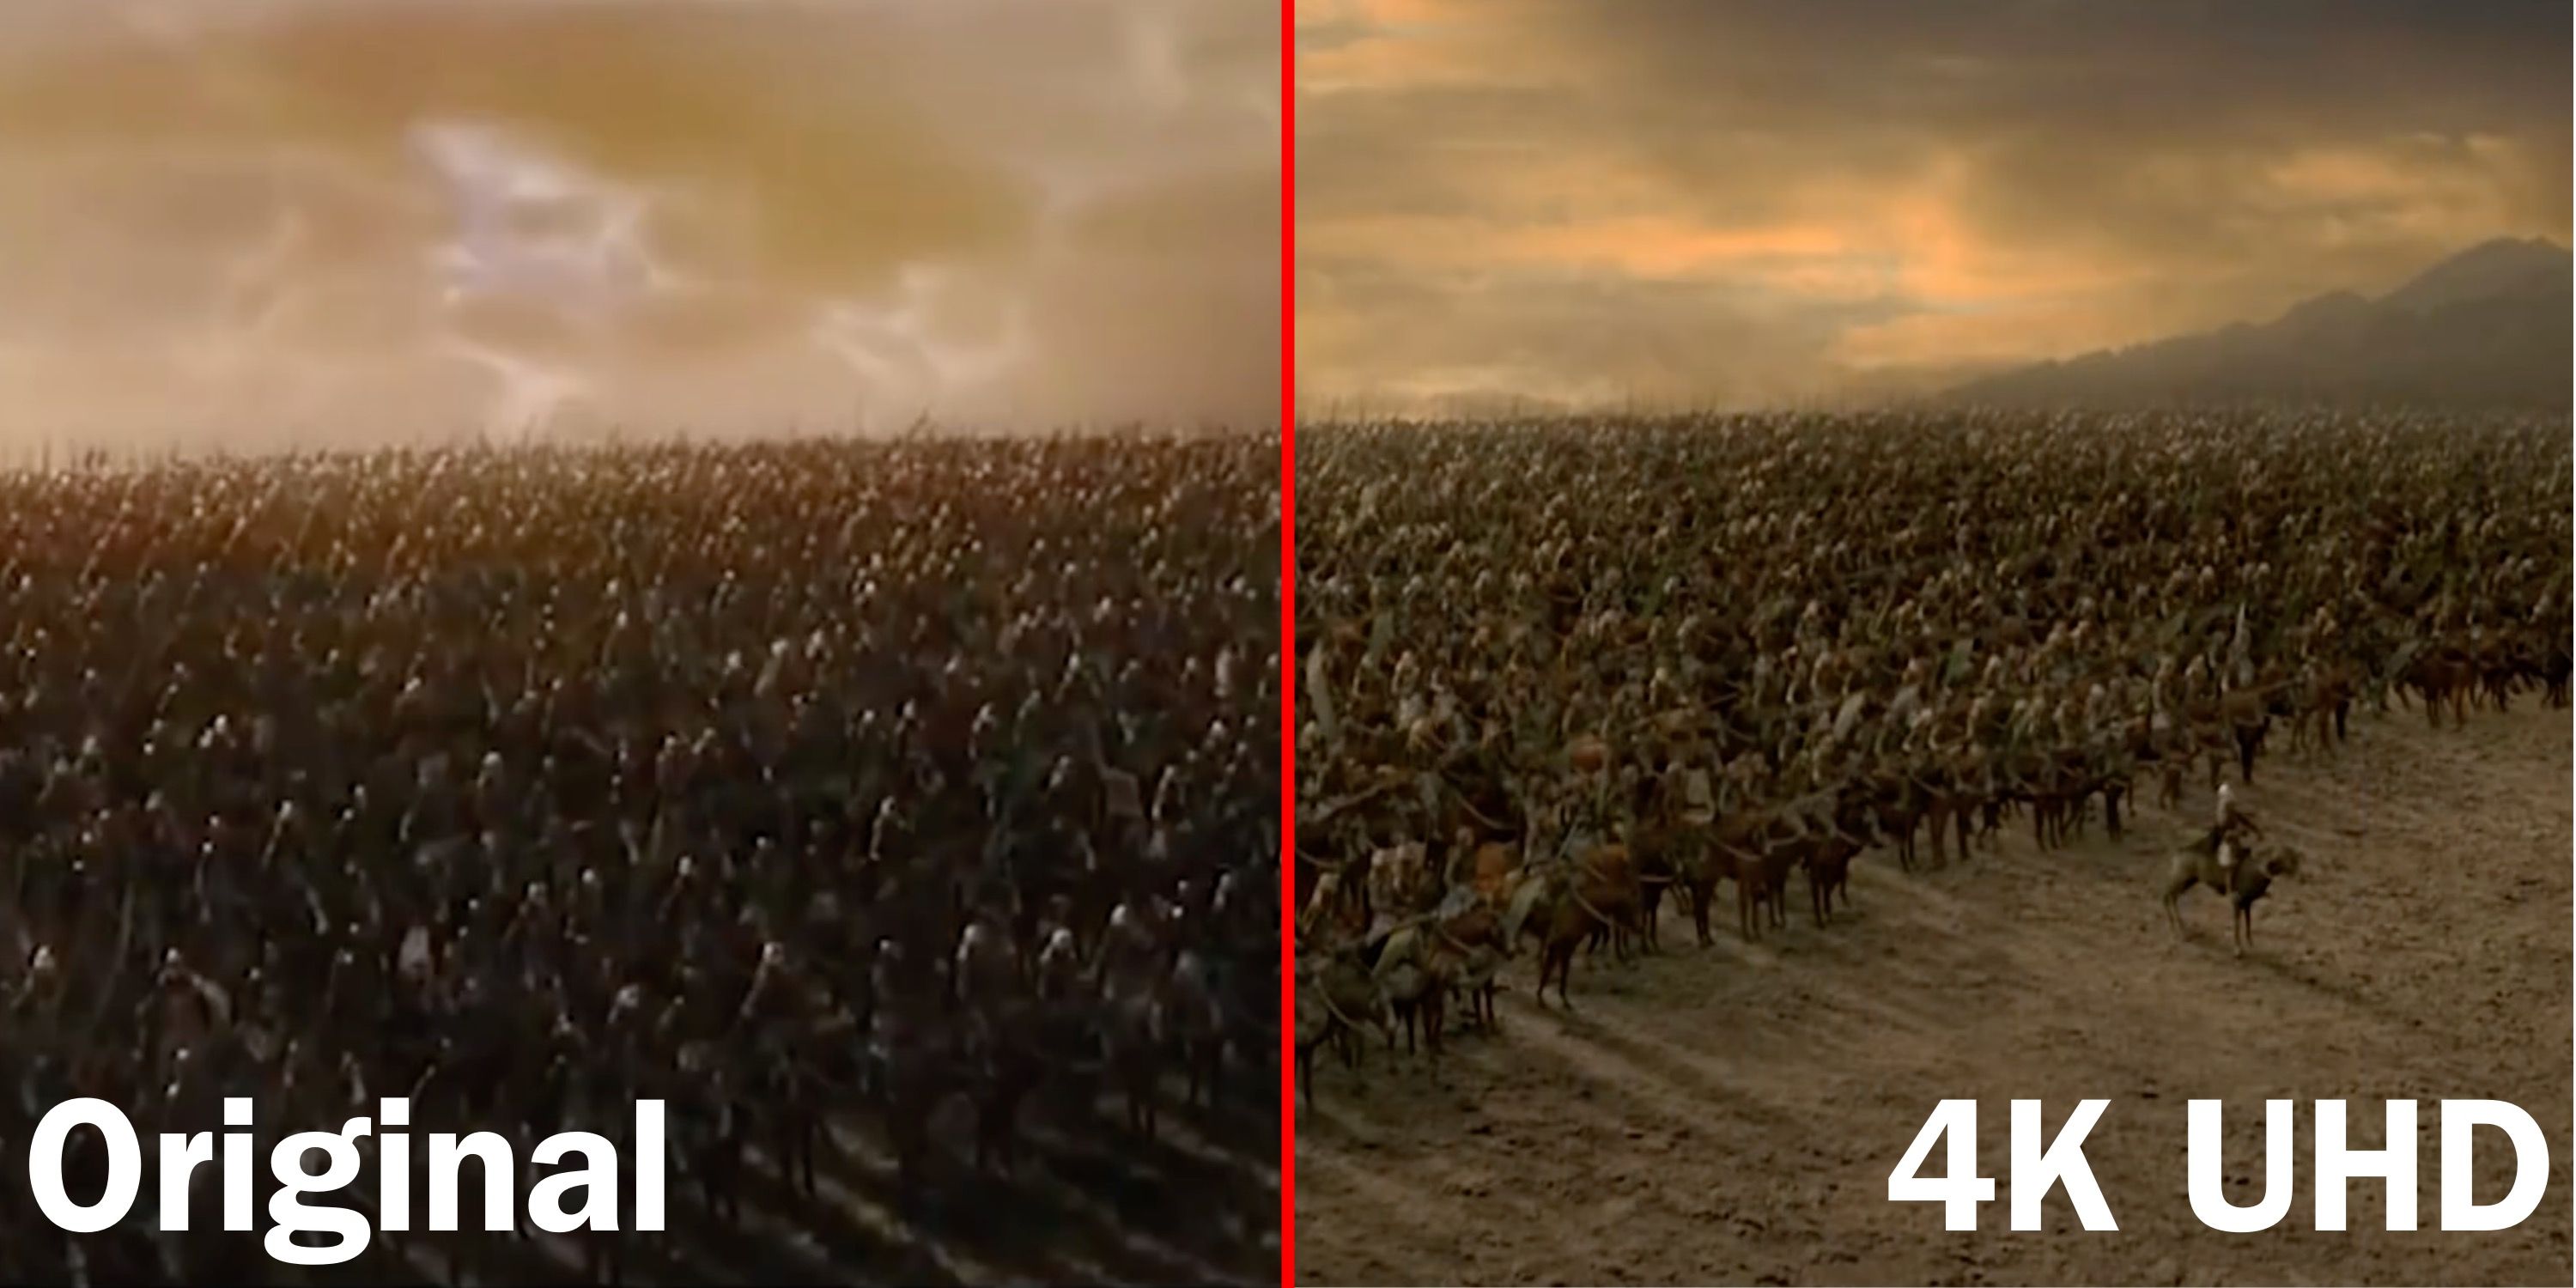 Lord Of The Rings 4K vs HD Which Is Better